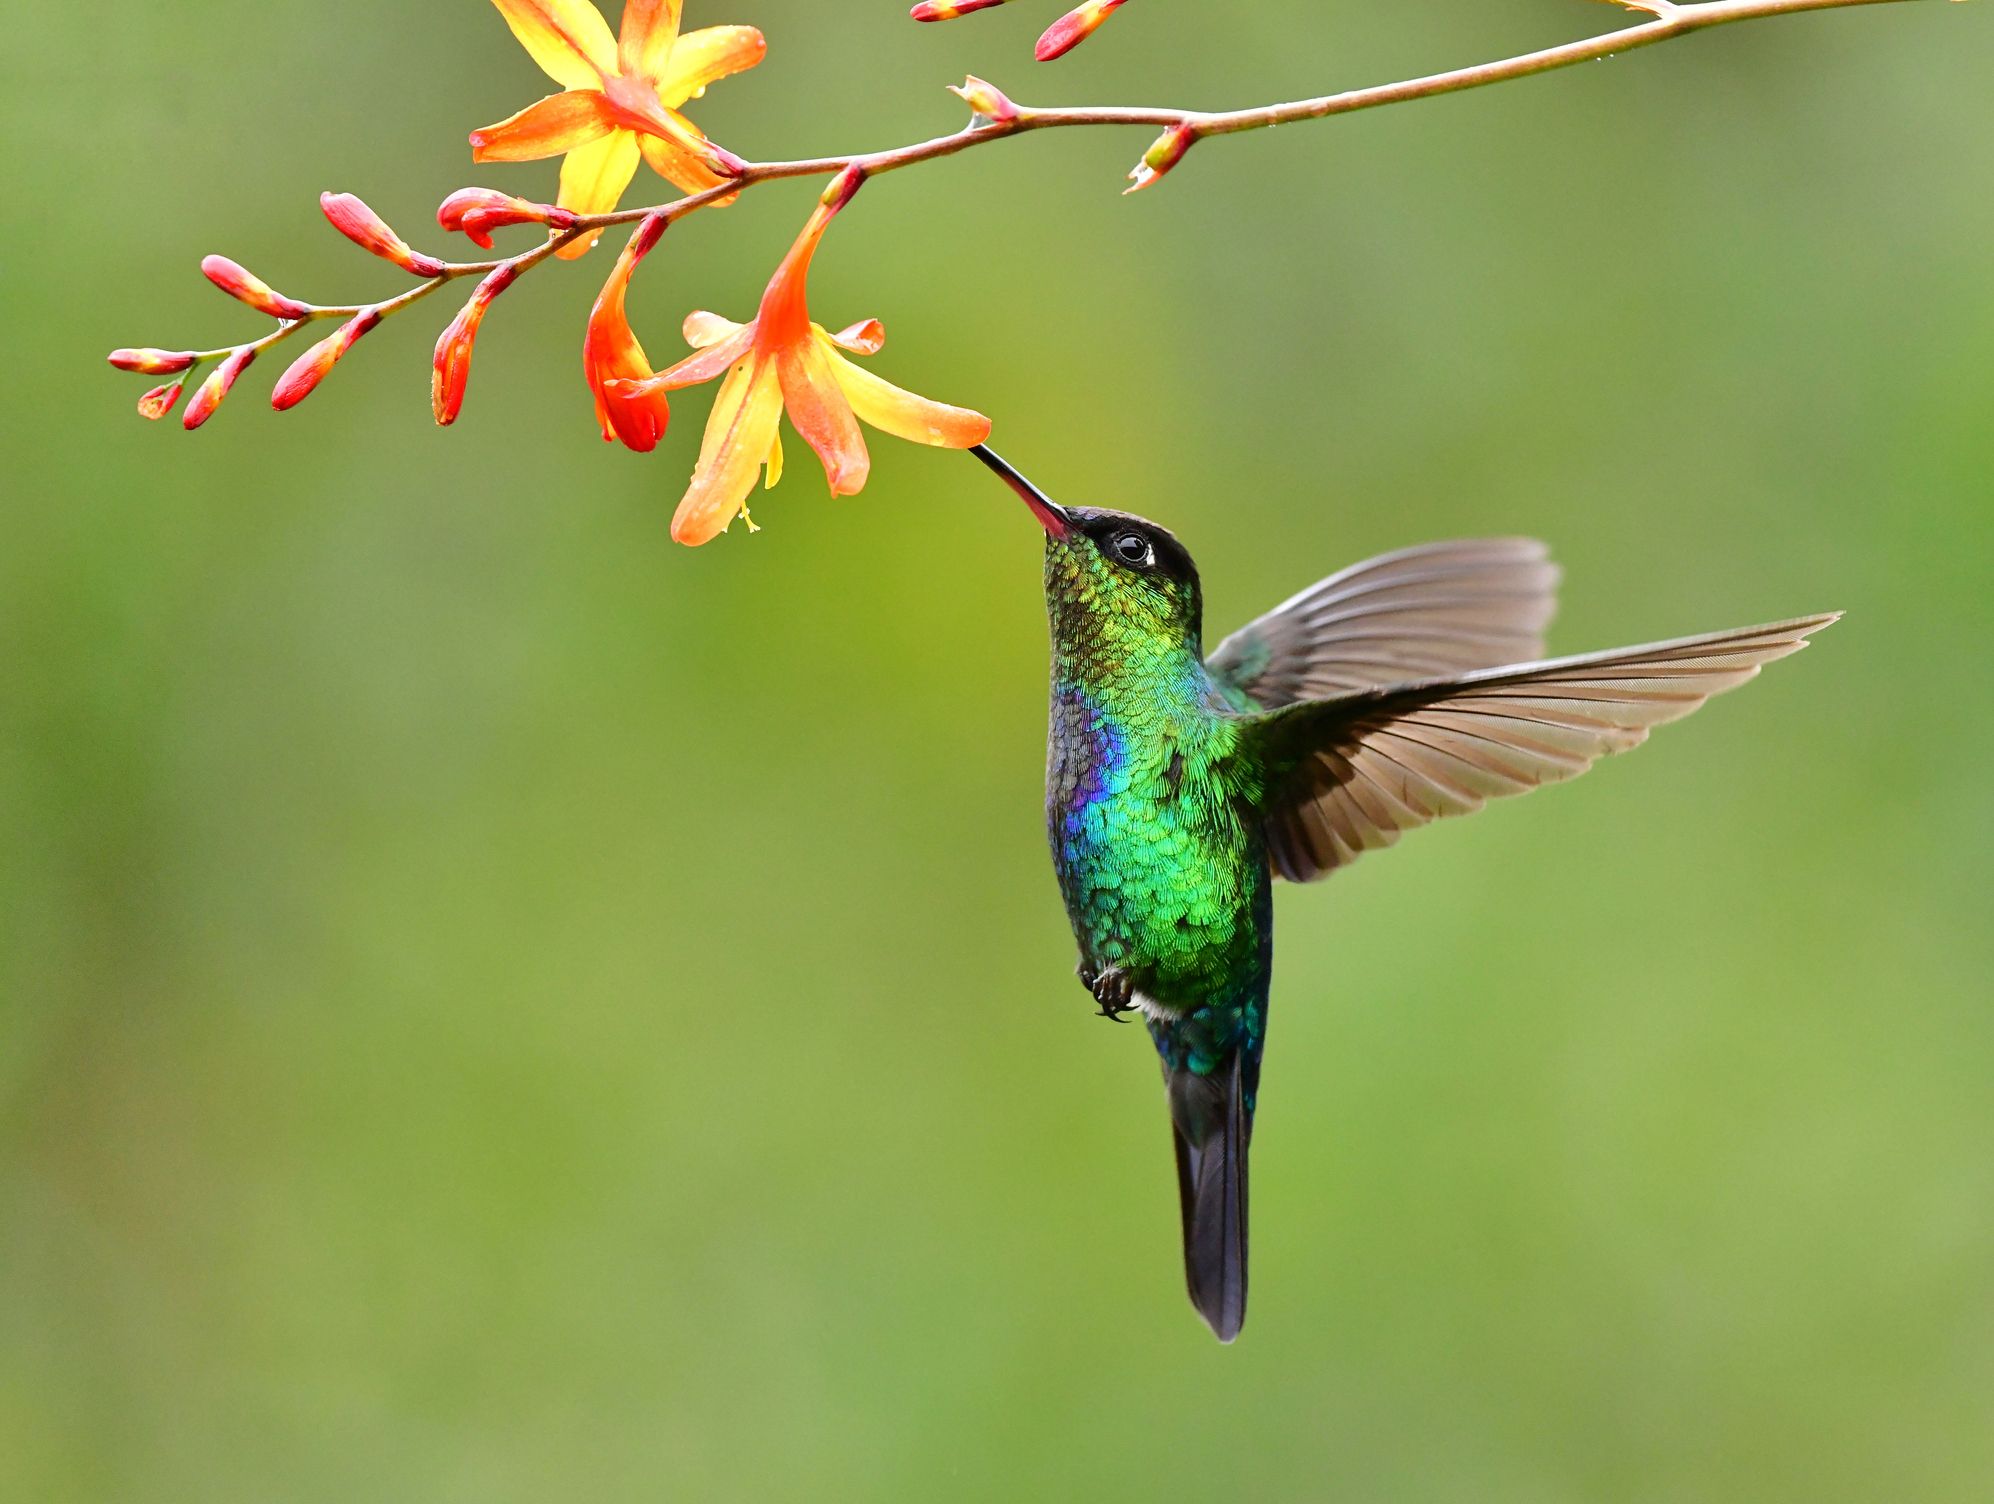 40 Hummingbirds Facts - How to Attract Hummingbirds